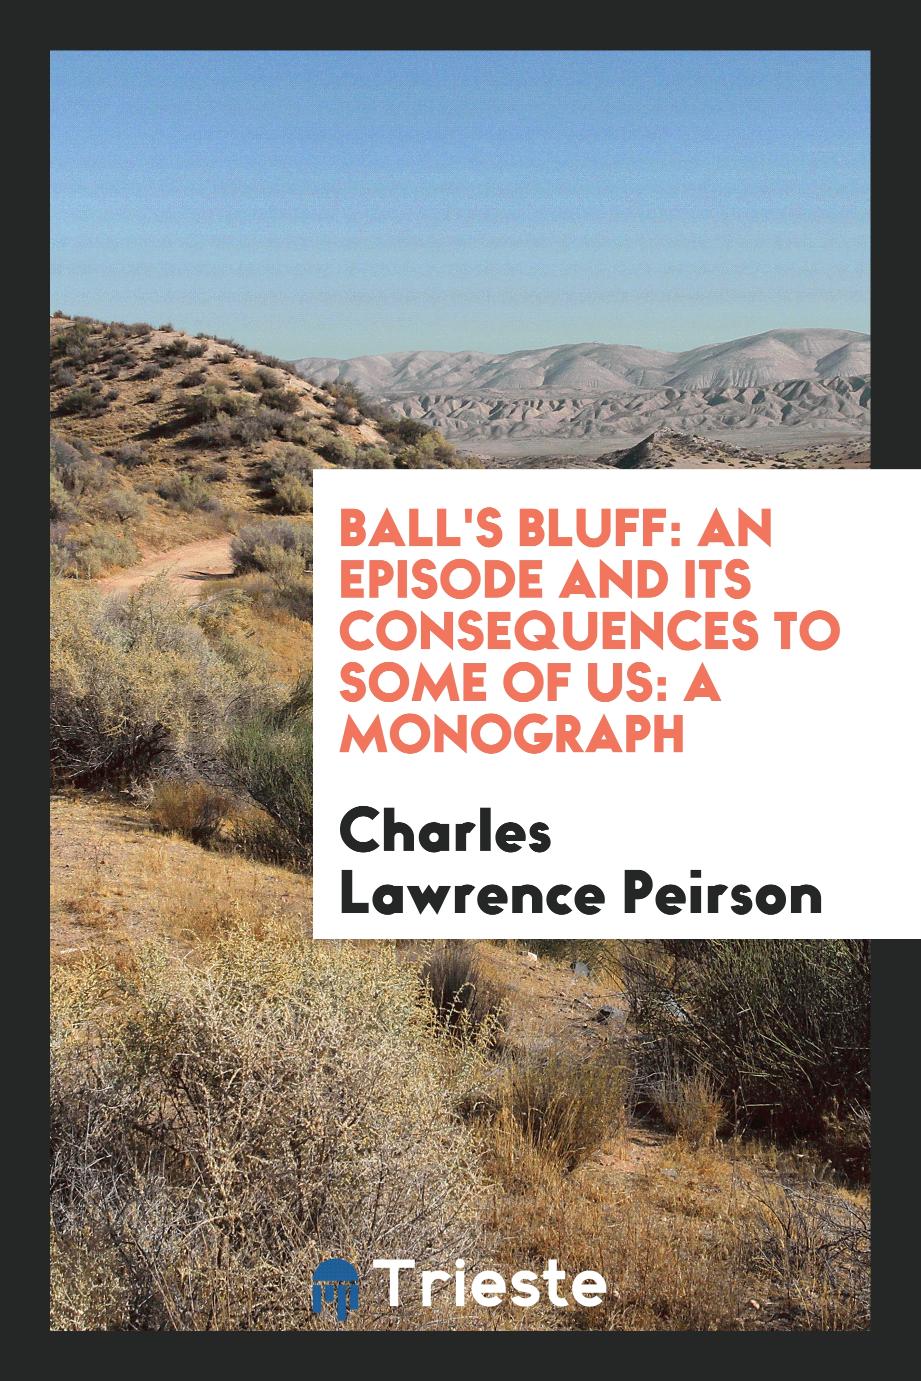 Ball's Bluff: An Episode and Its Consequences to Some of Us: a monograph